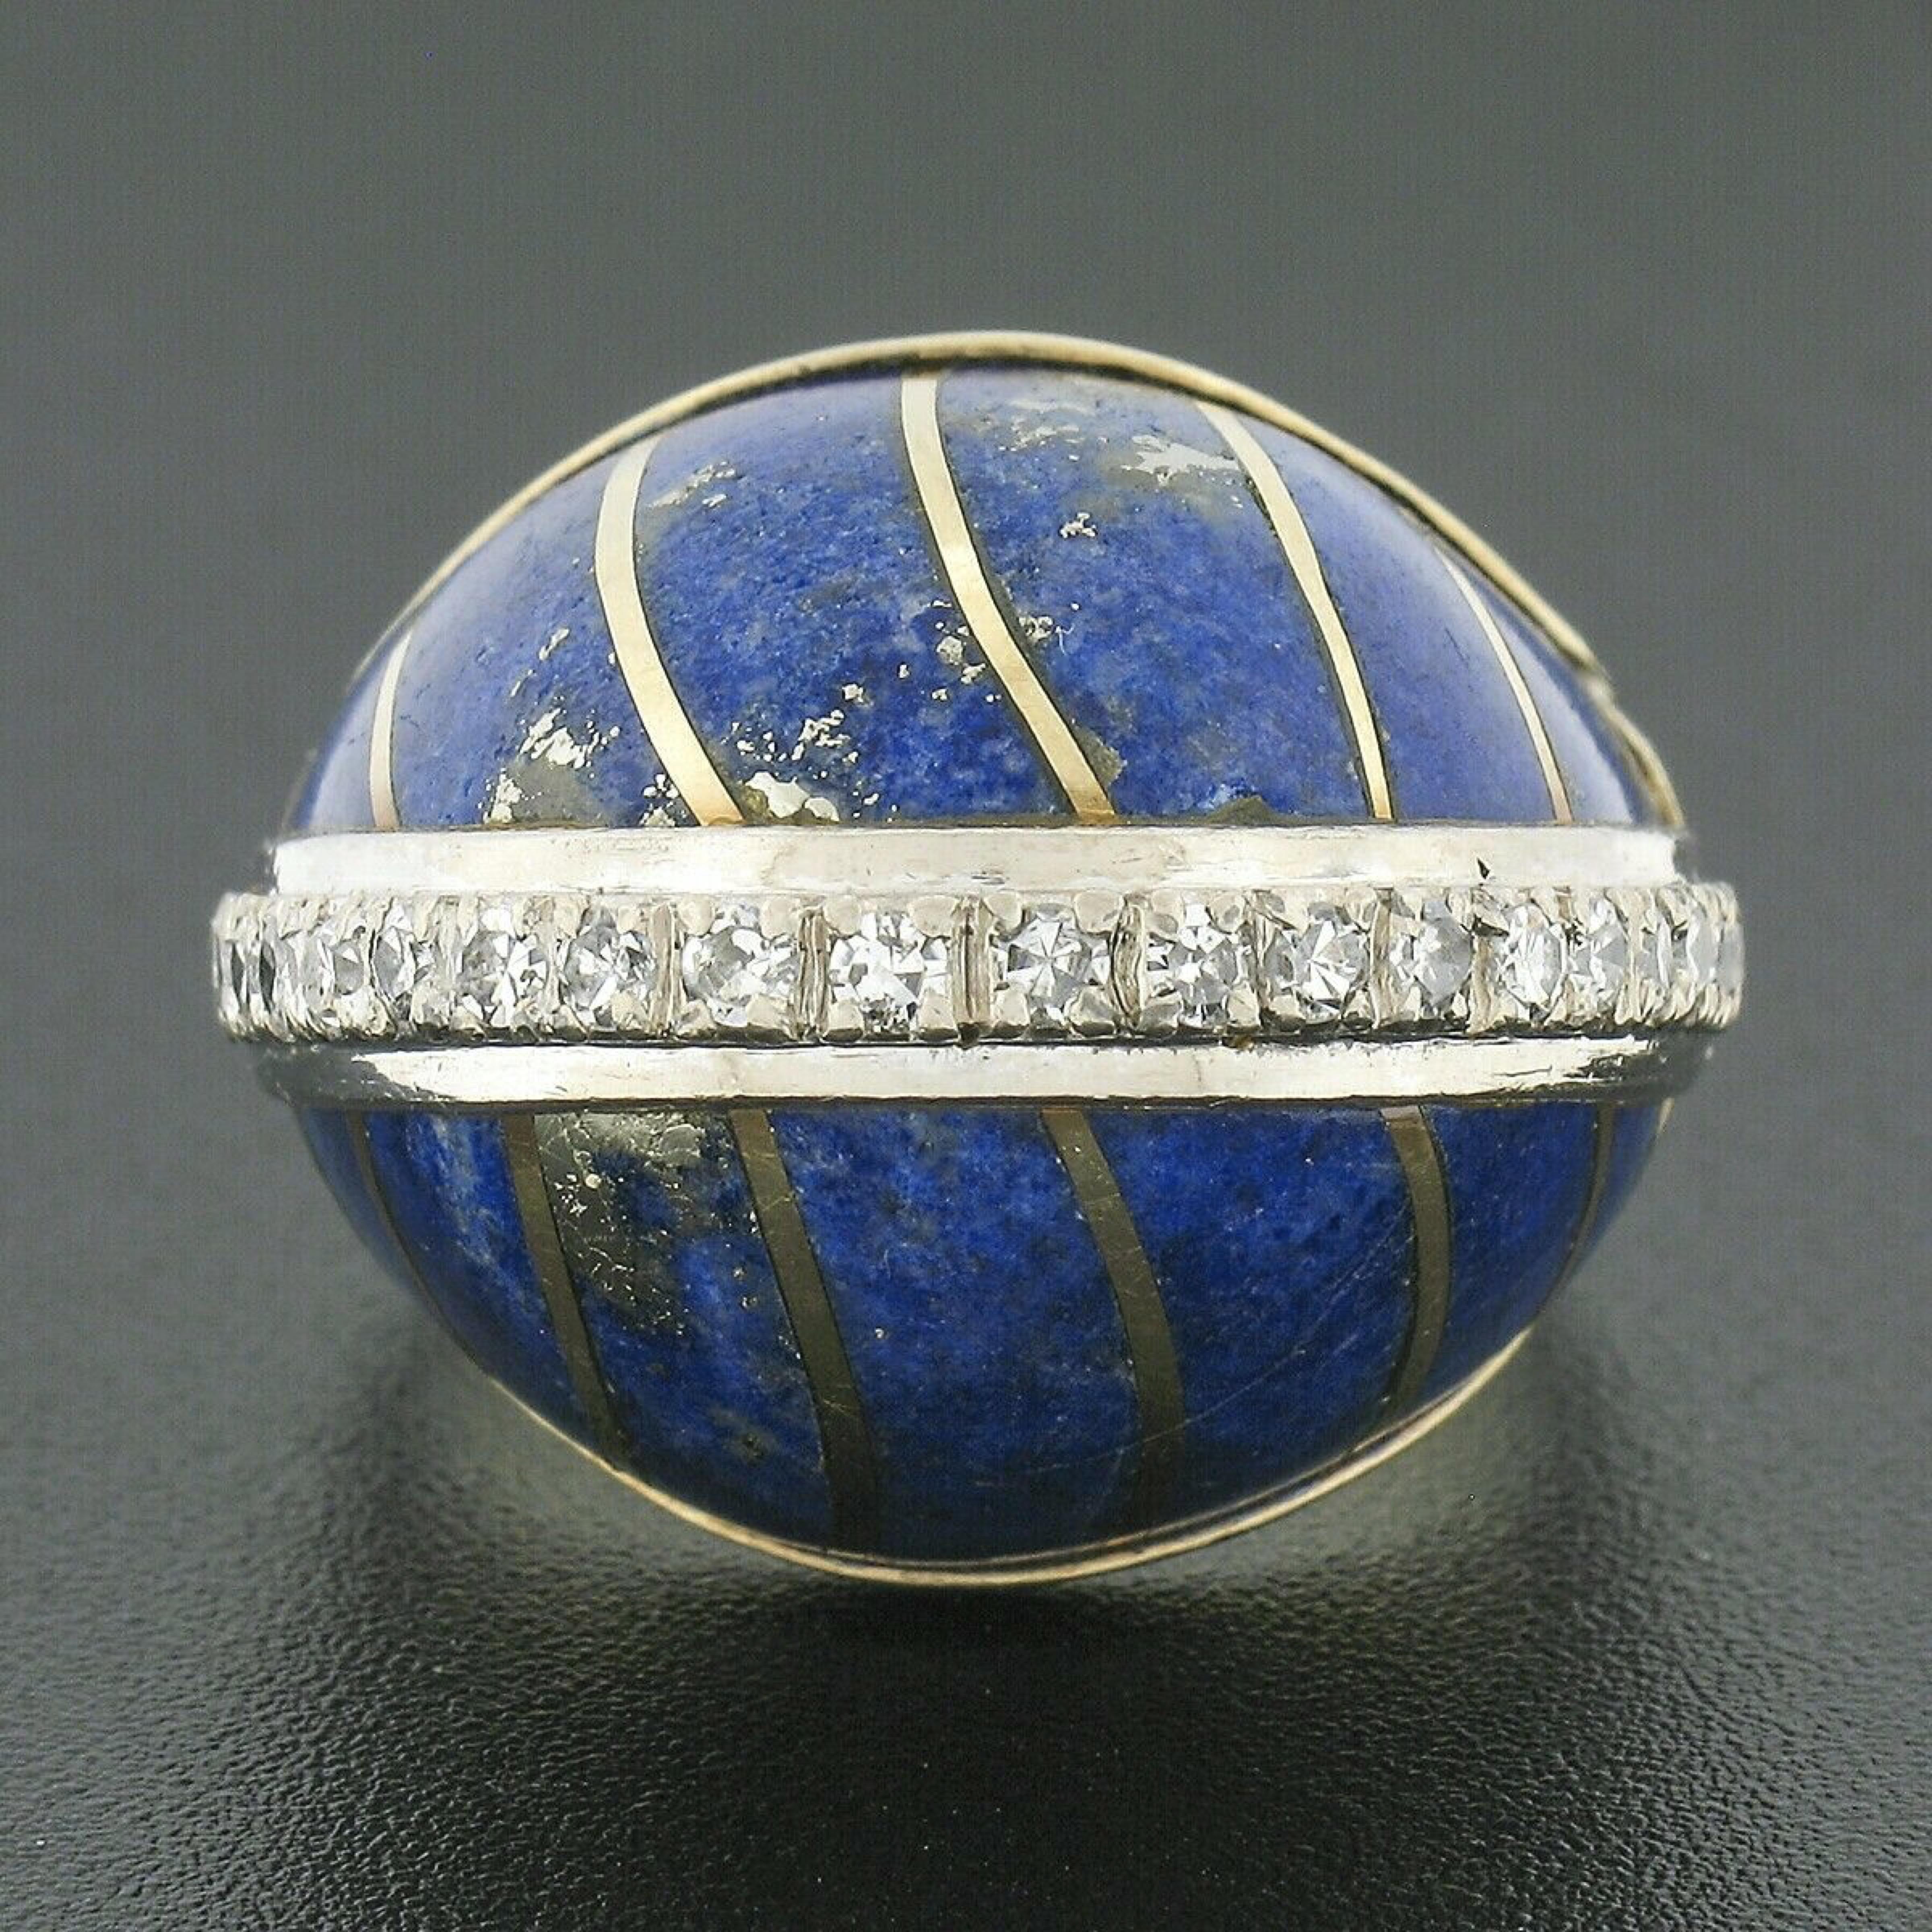 This magnificent, vintage, bombé style ring was crafted from solid 14k yellow gold. It features a large domed top with an elegant design that is constructed from inlaid set lapis stones and inlaid yellow gold stripes. The fine lapis are well matched